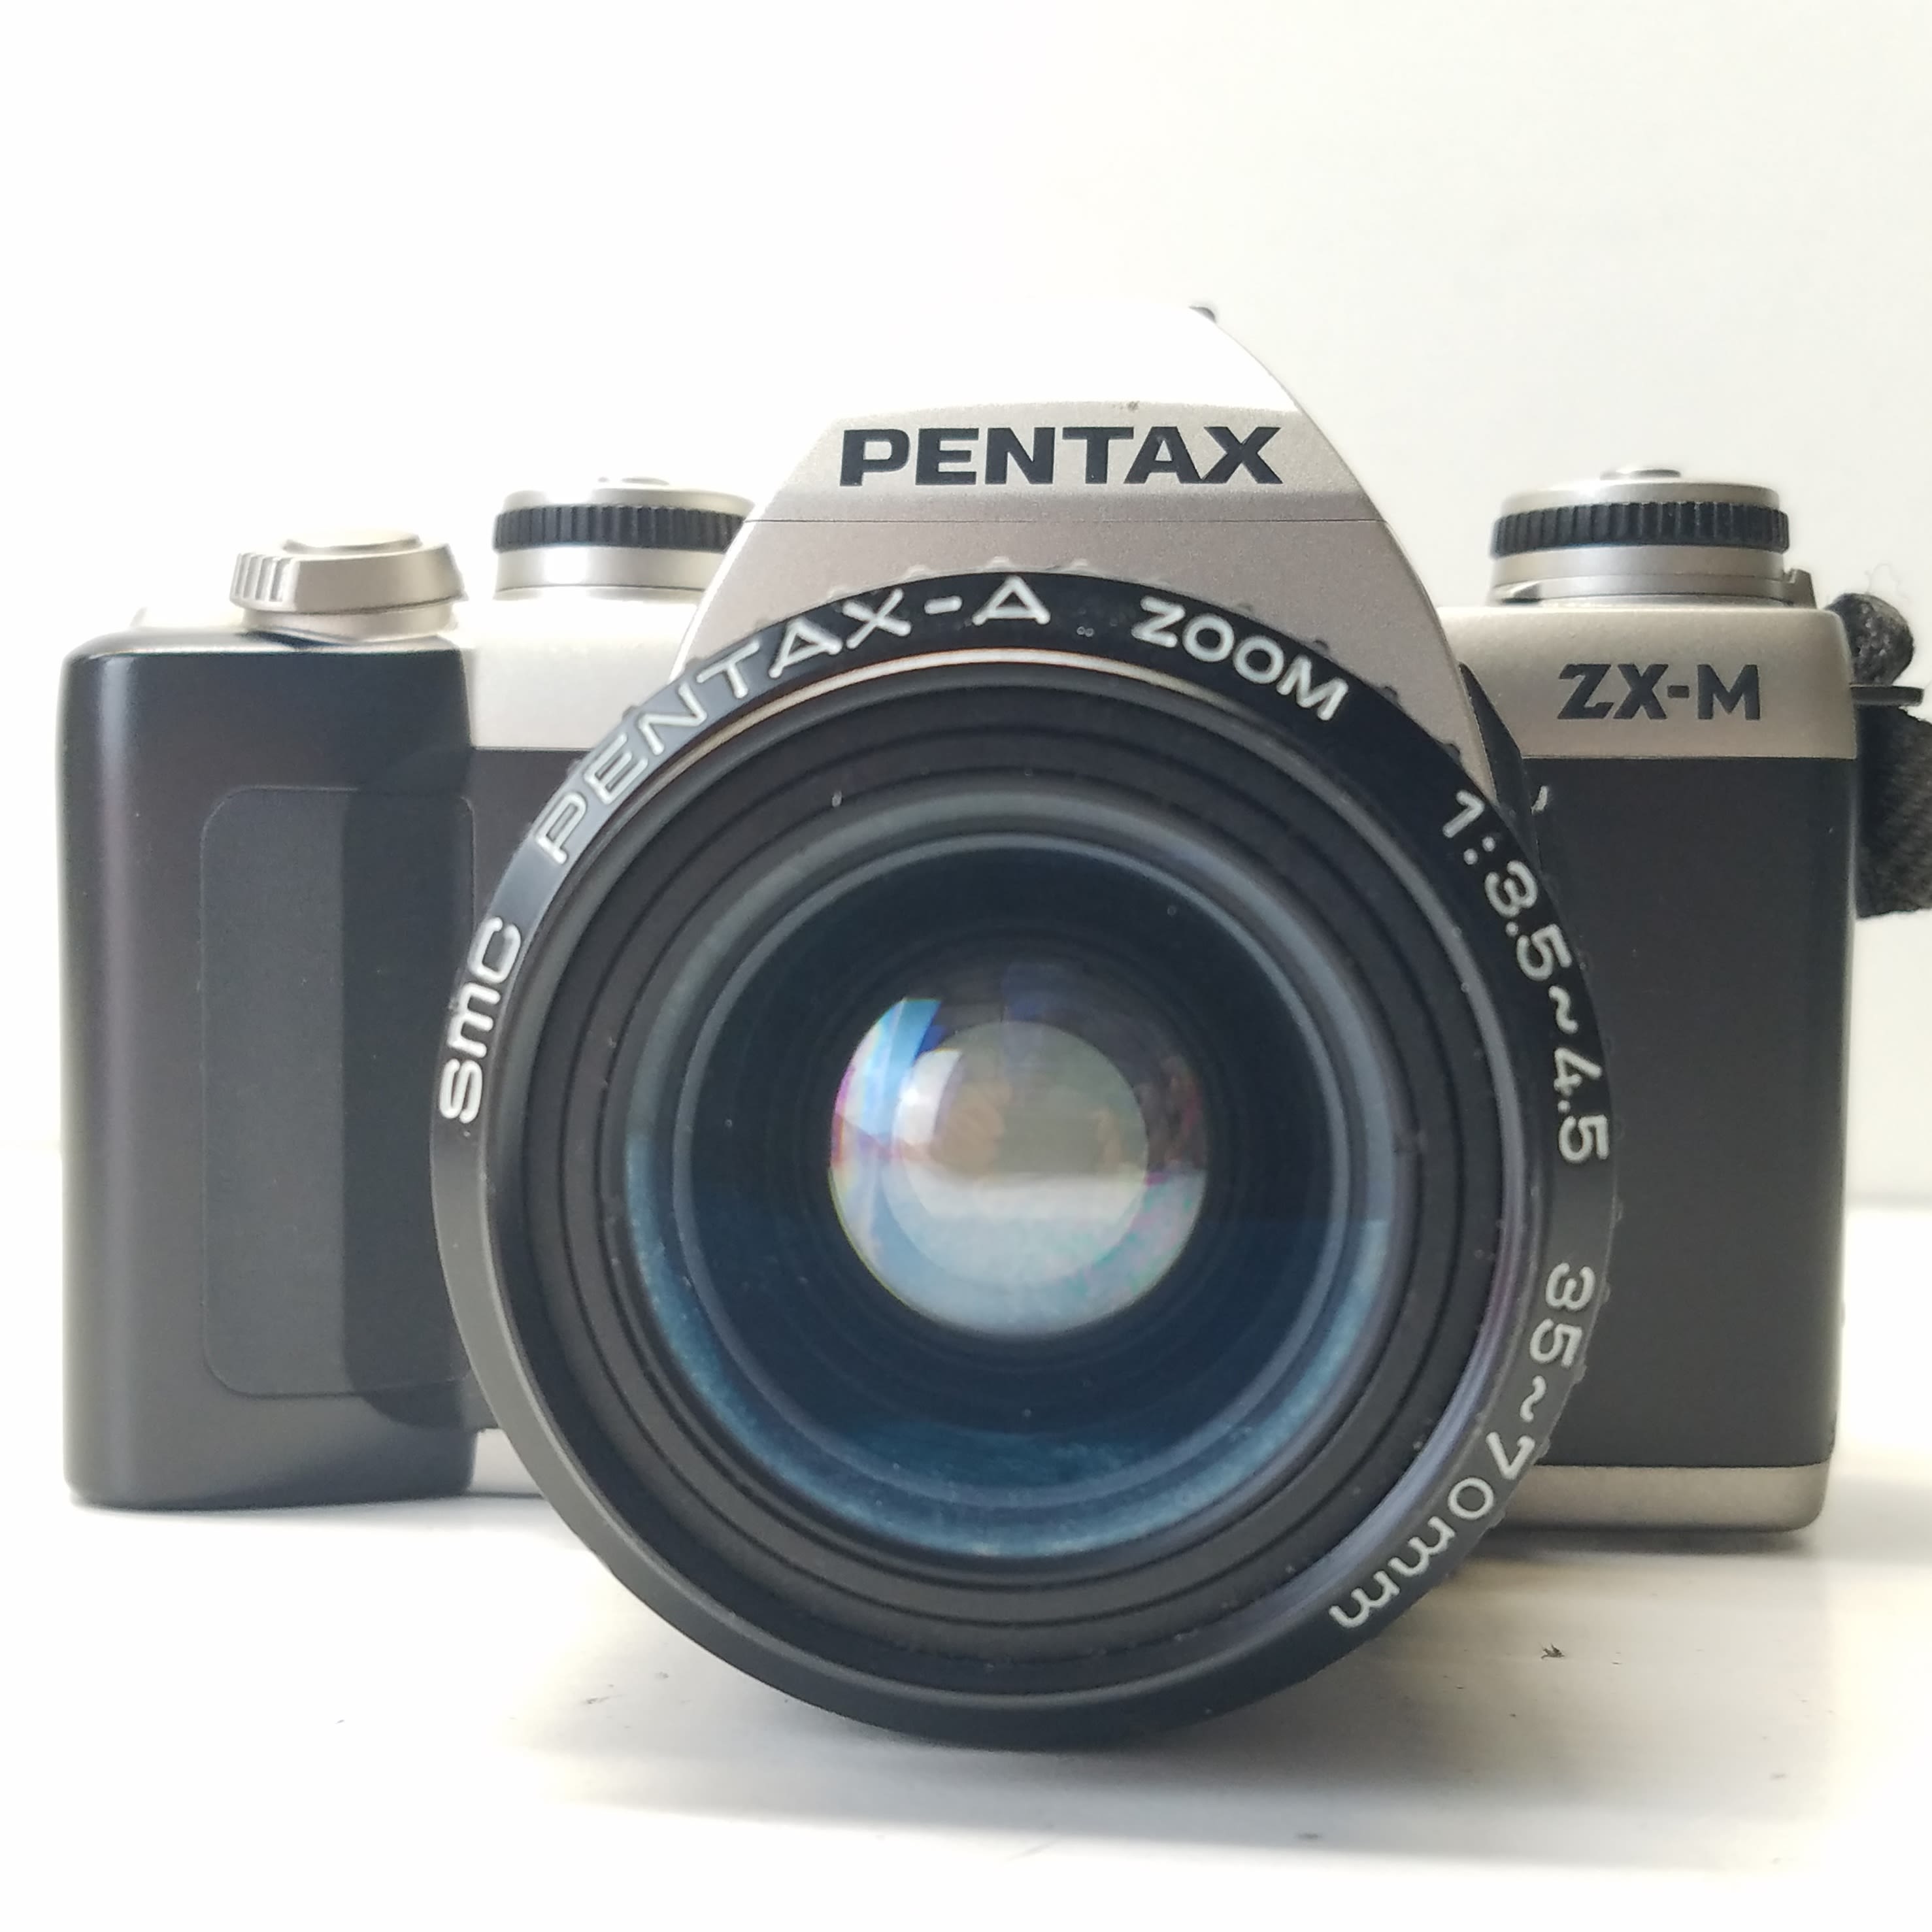 Buy Pentax ZX-M 35mm SLR Camera with Lens for USD 35.24 | GoodwillFinds